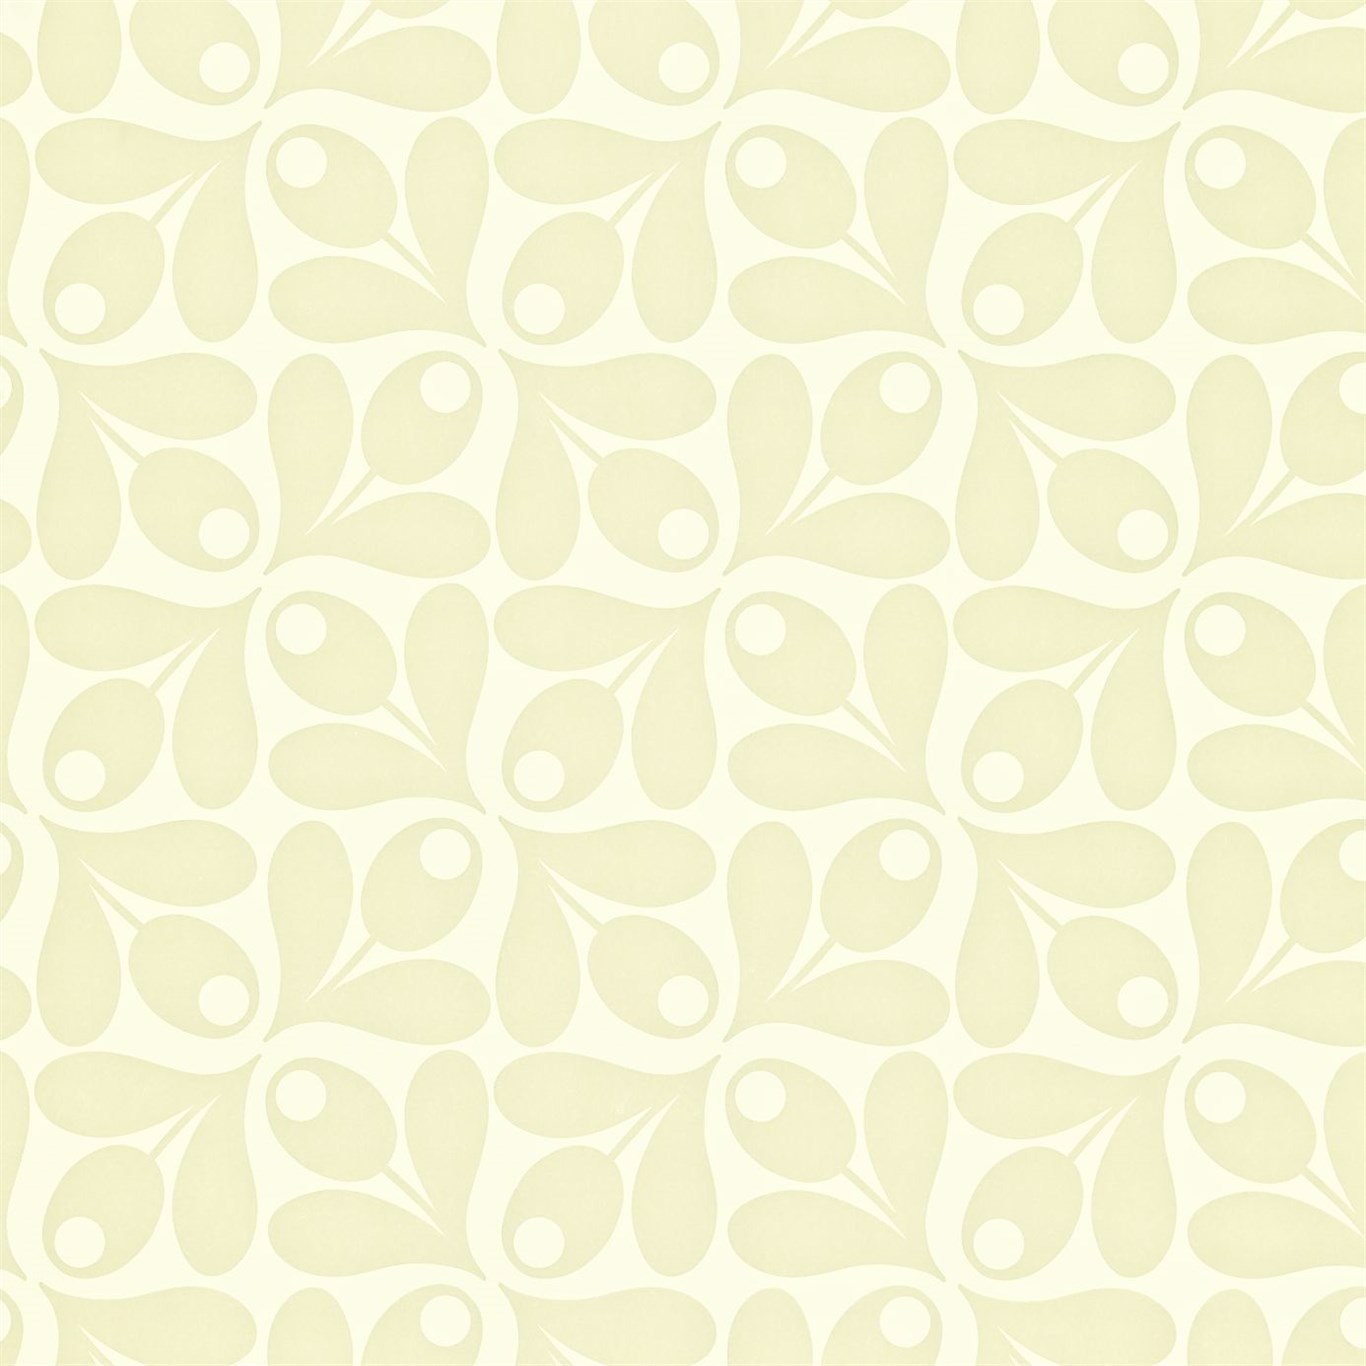 Small Acorn Cup Sandstone Wallpaper by HAR